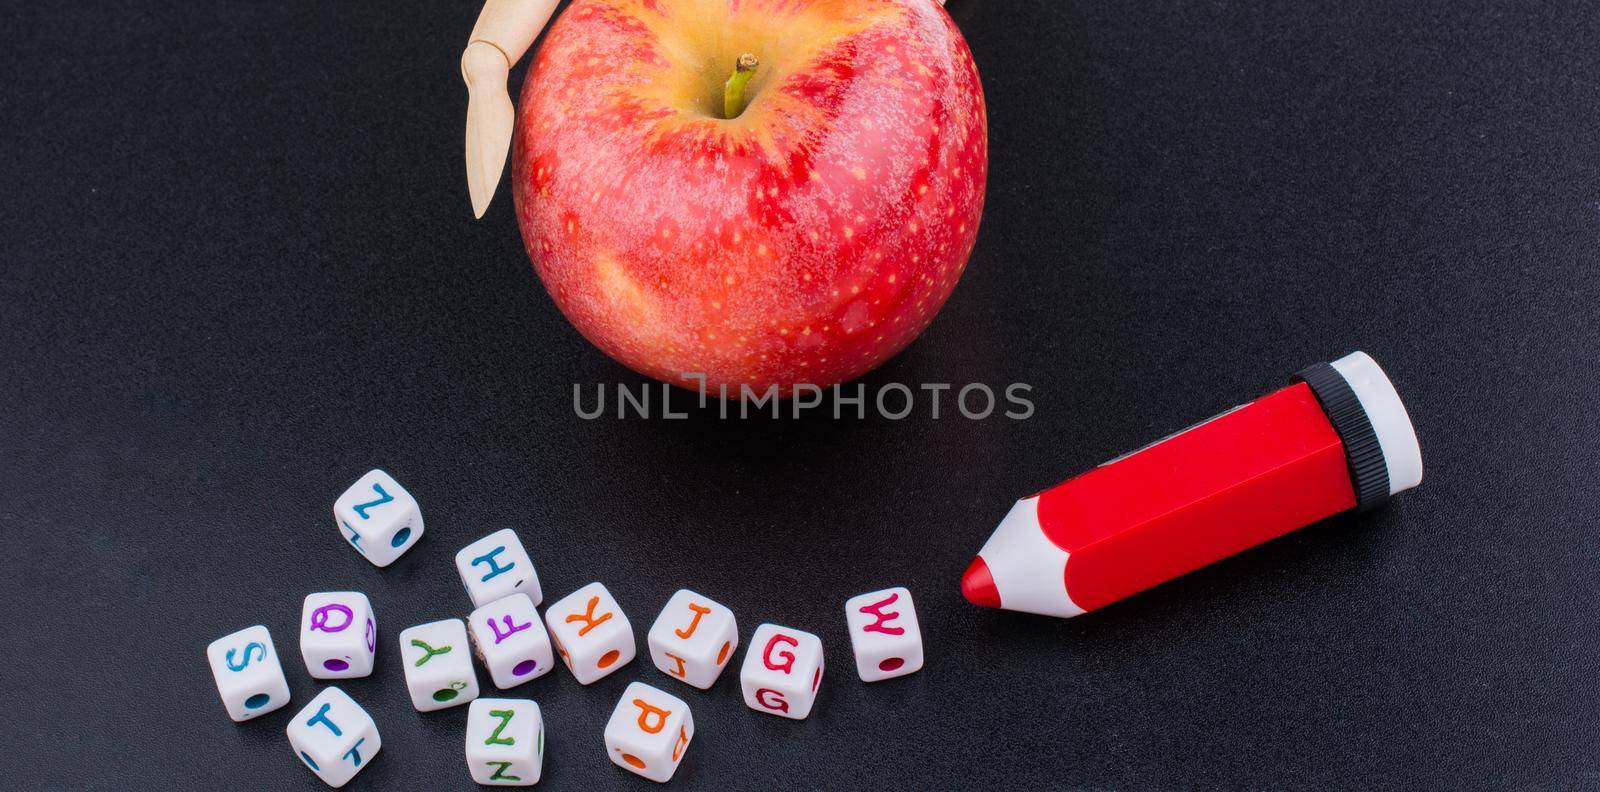 Back to school theme with an apple by berkay